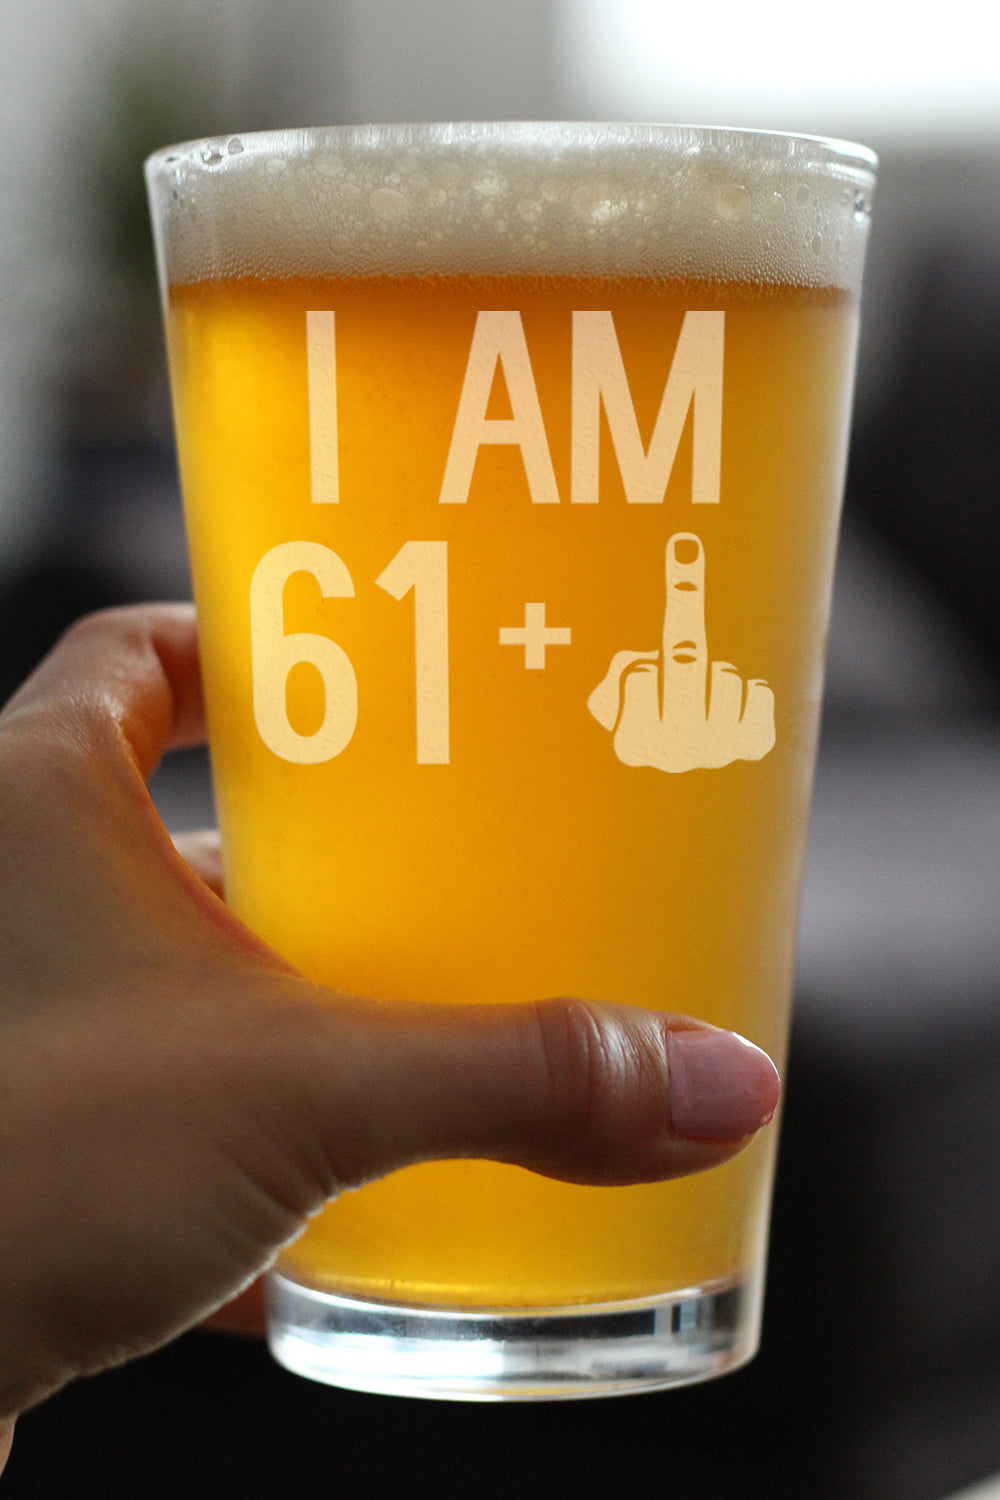 61 + 1 Middle Finger - 16 oz Pint Glass for Beer - Funny 62nd Birthday Gifts for Men Turning 62